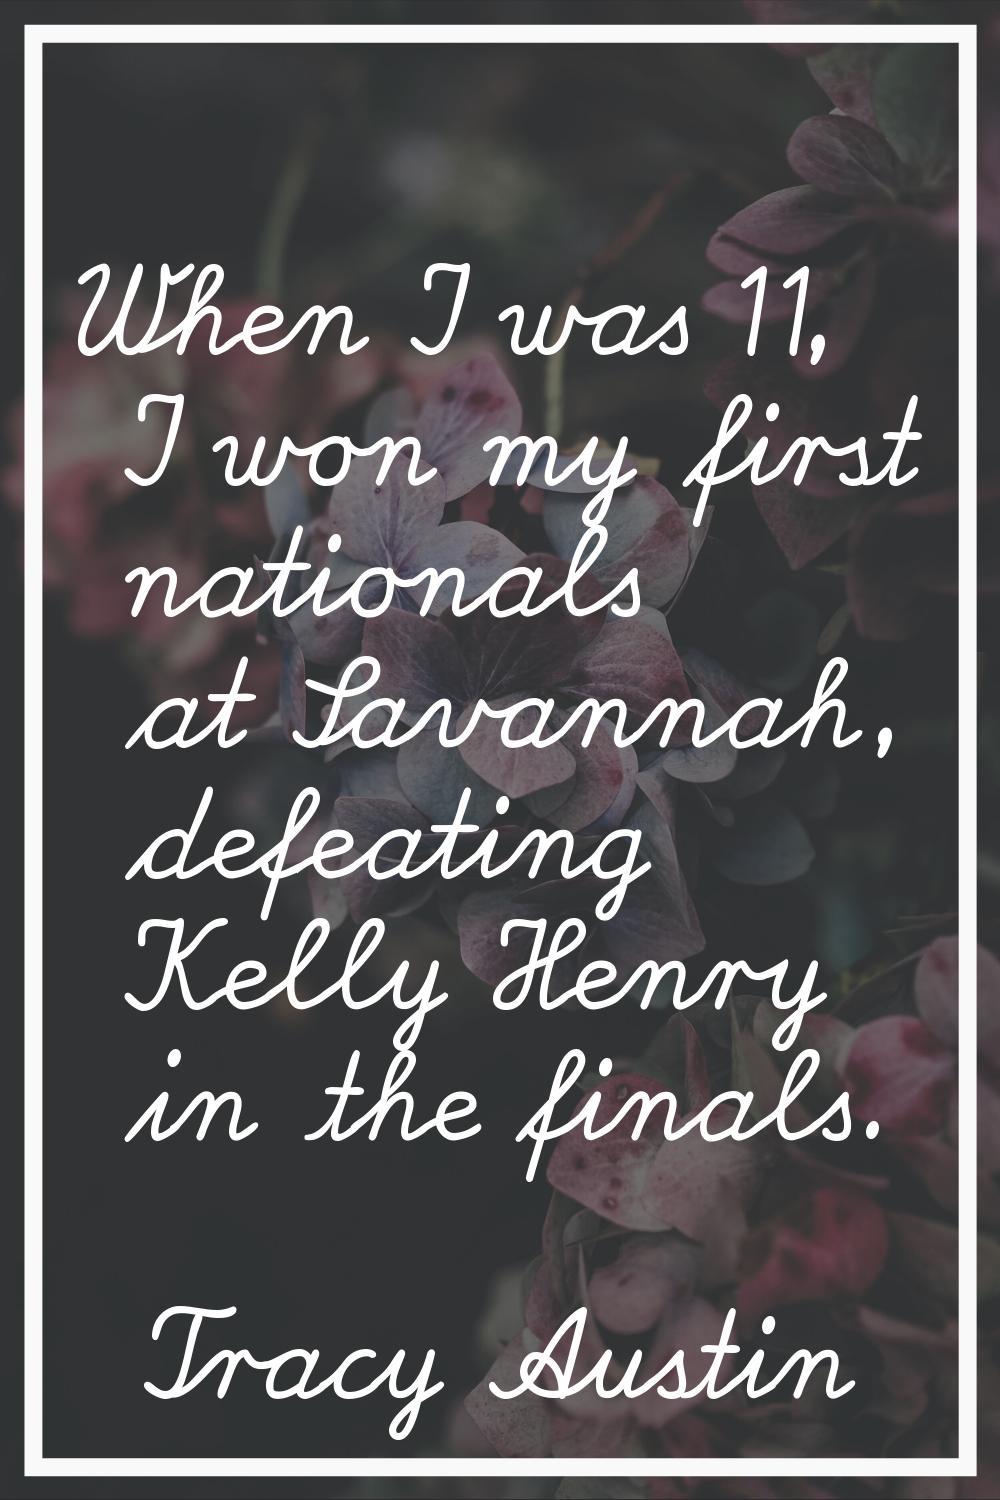 When I was 11, I won my first nationals at Savannah, defeating Kelly Henry in the finals.